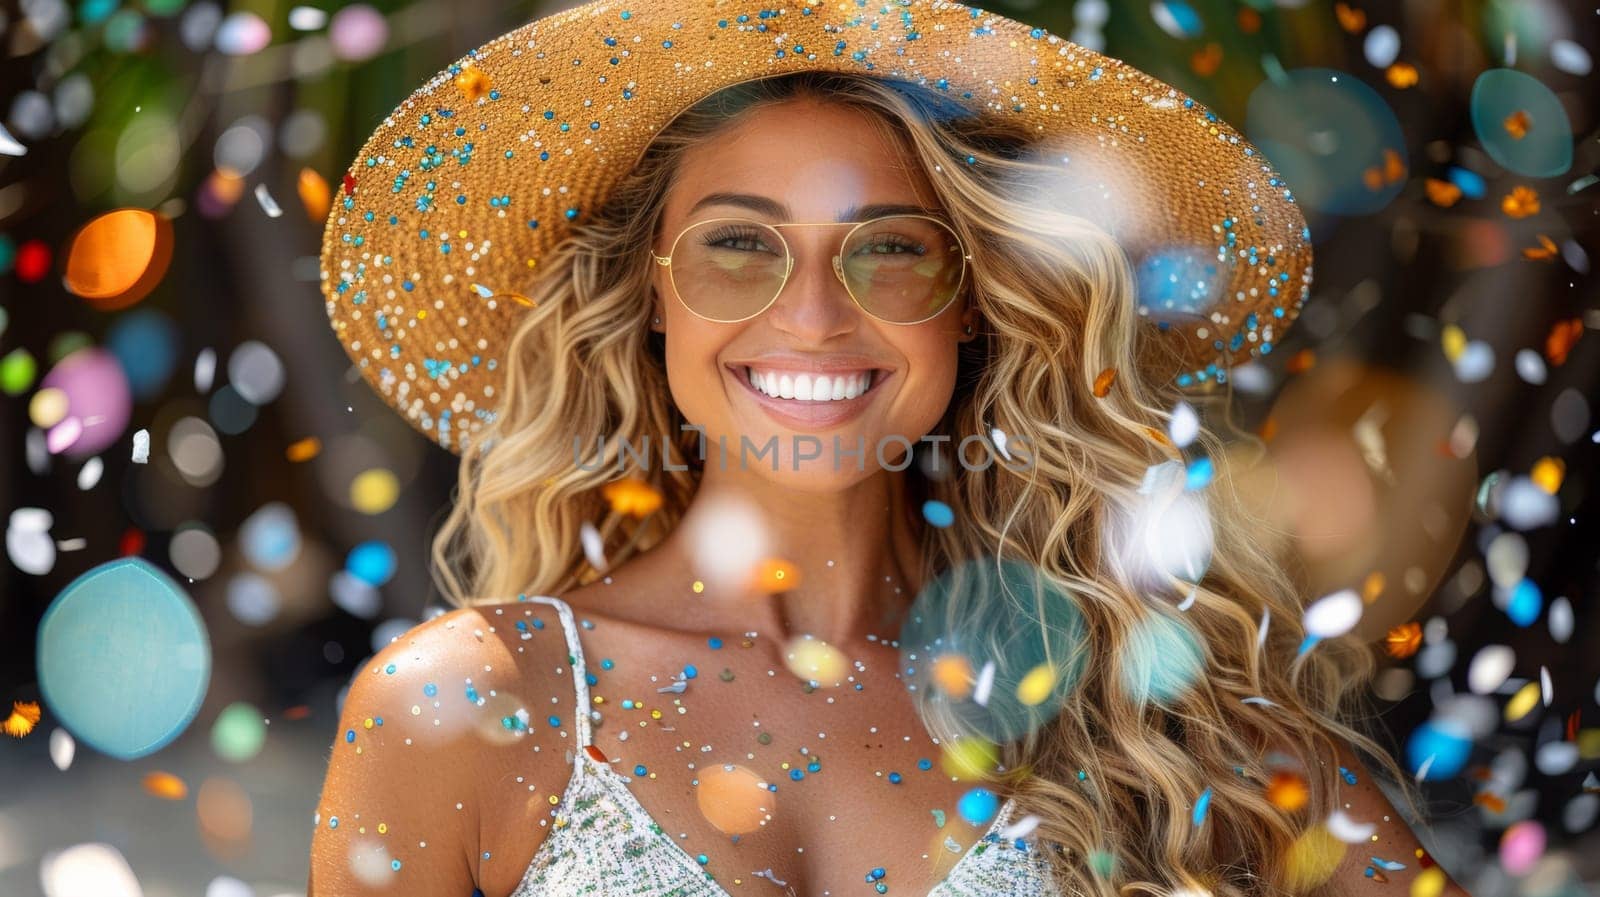 A woman in a hat and sunglasses smiling with confetti falling around her